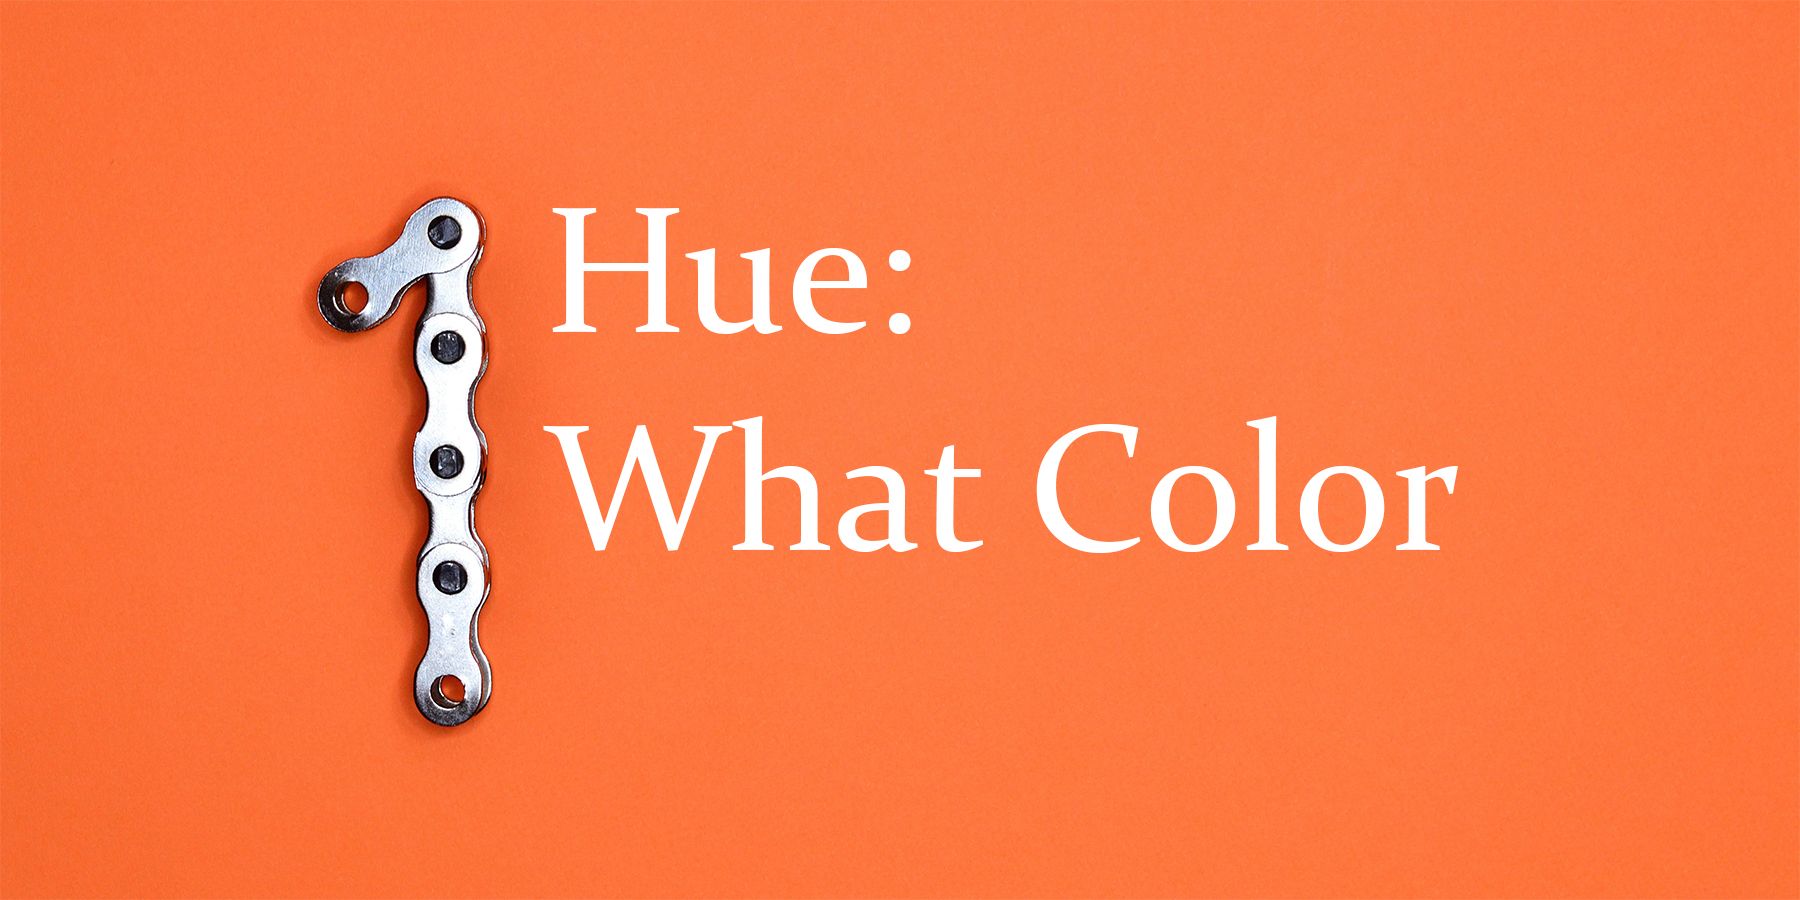 Hue is what color